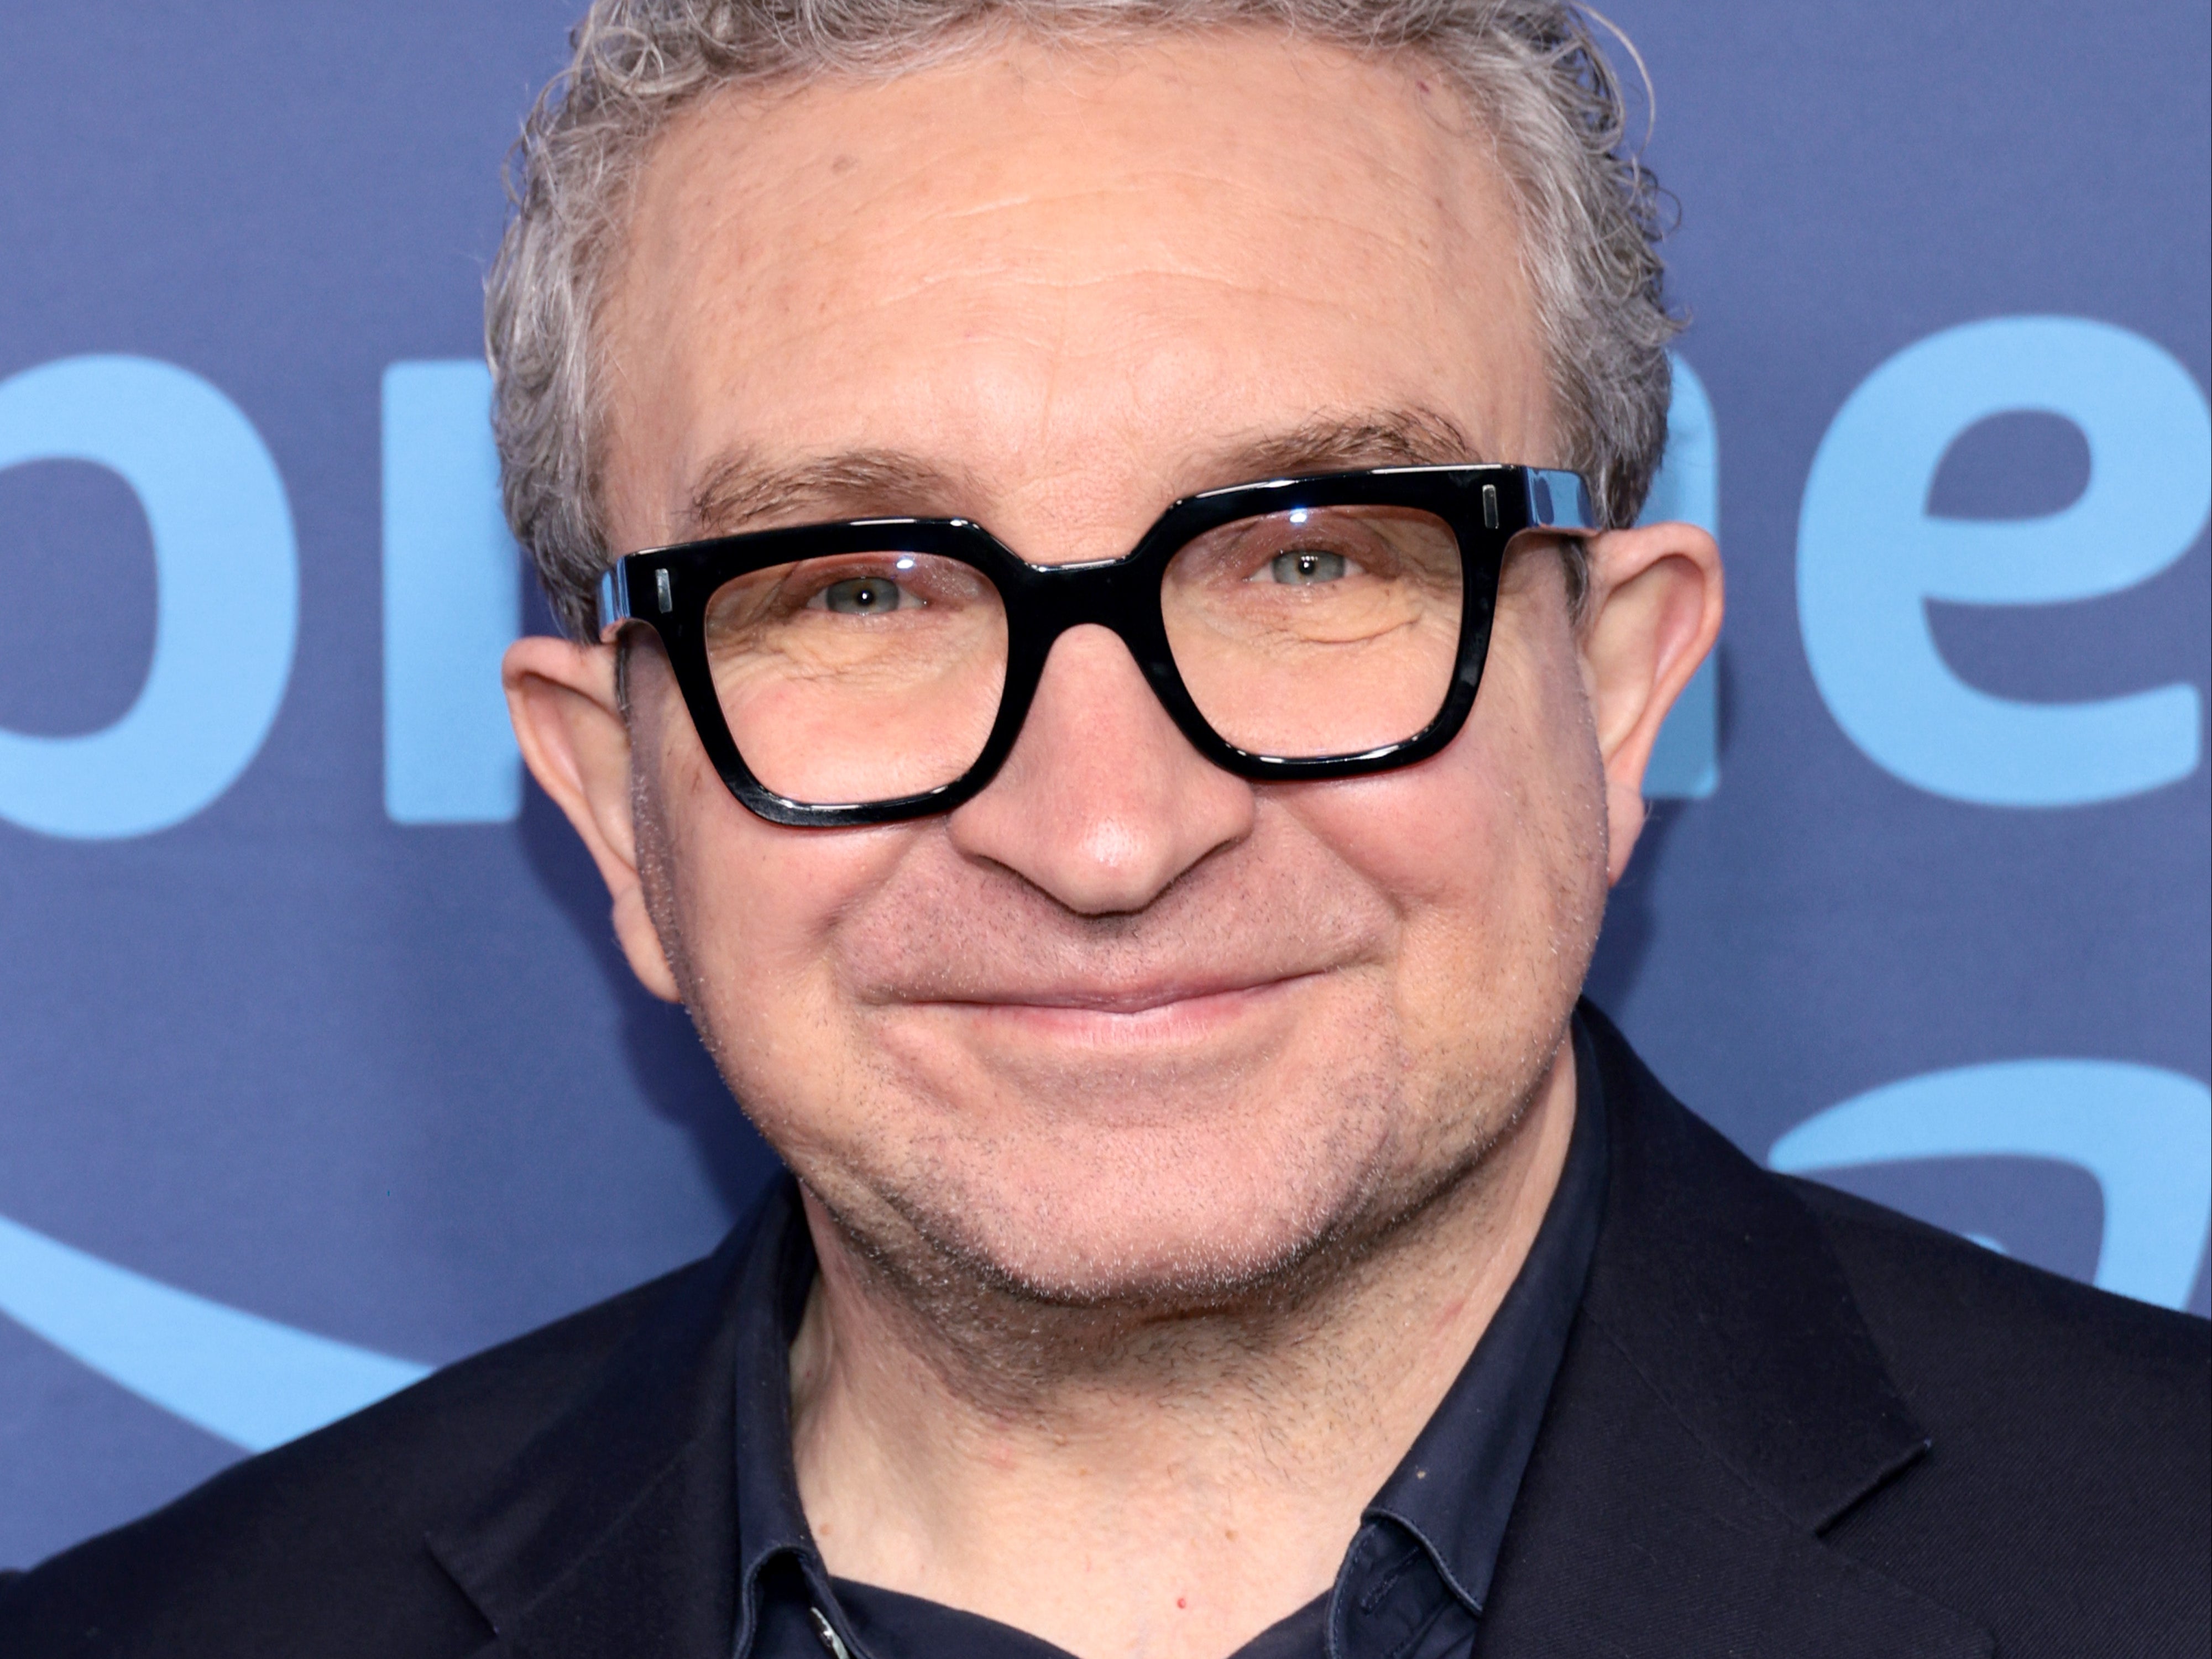 Eddie Marsan has been a successful actor since the 1990s